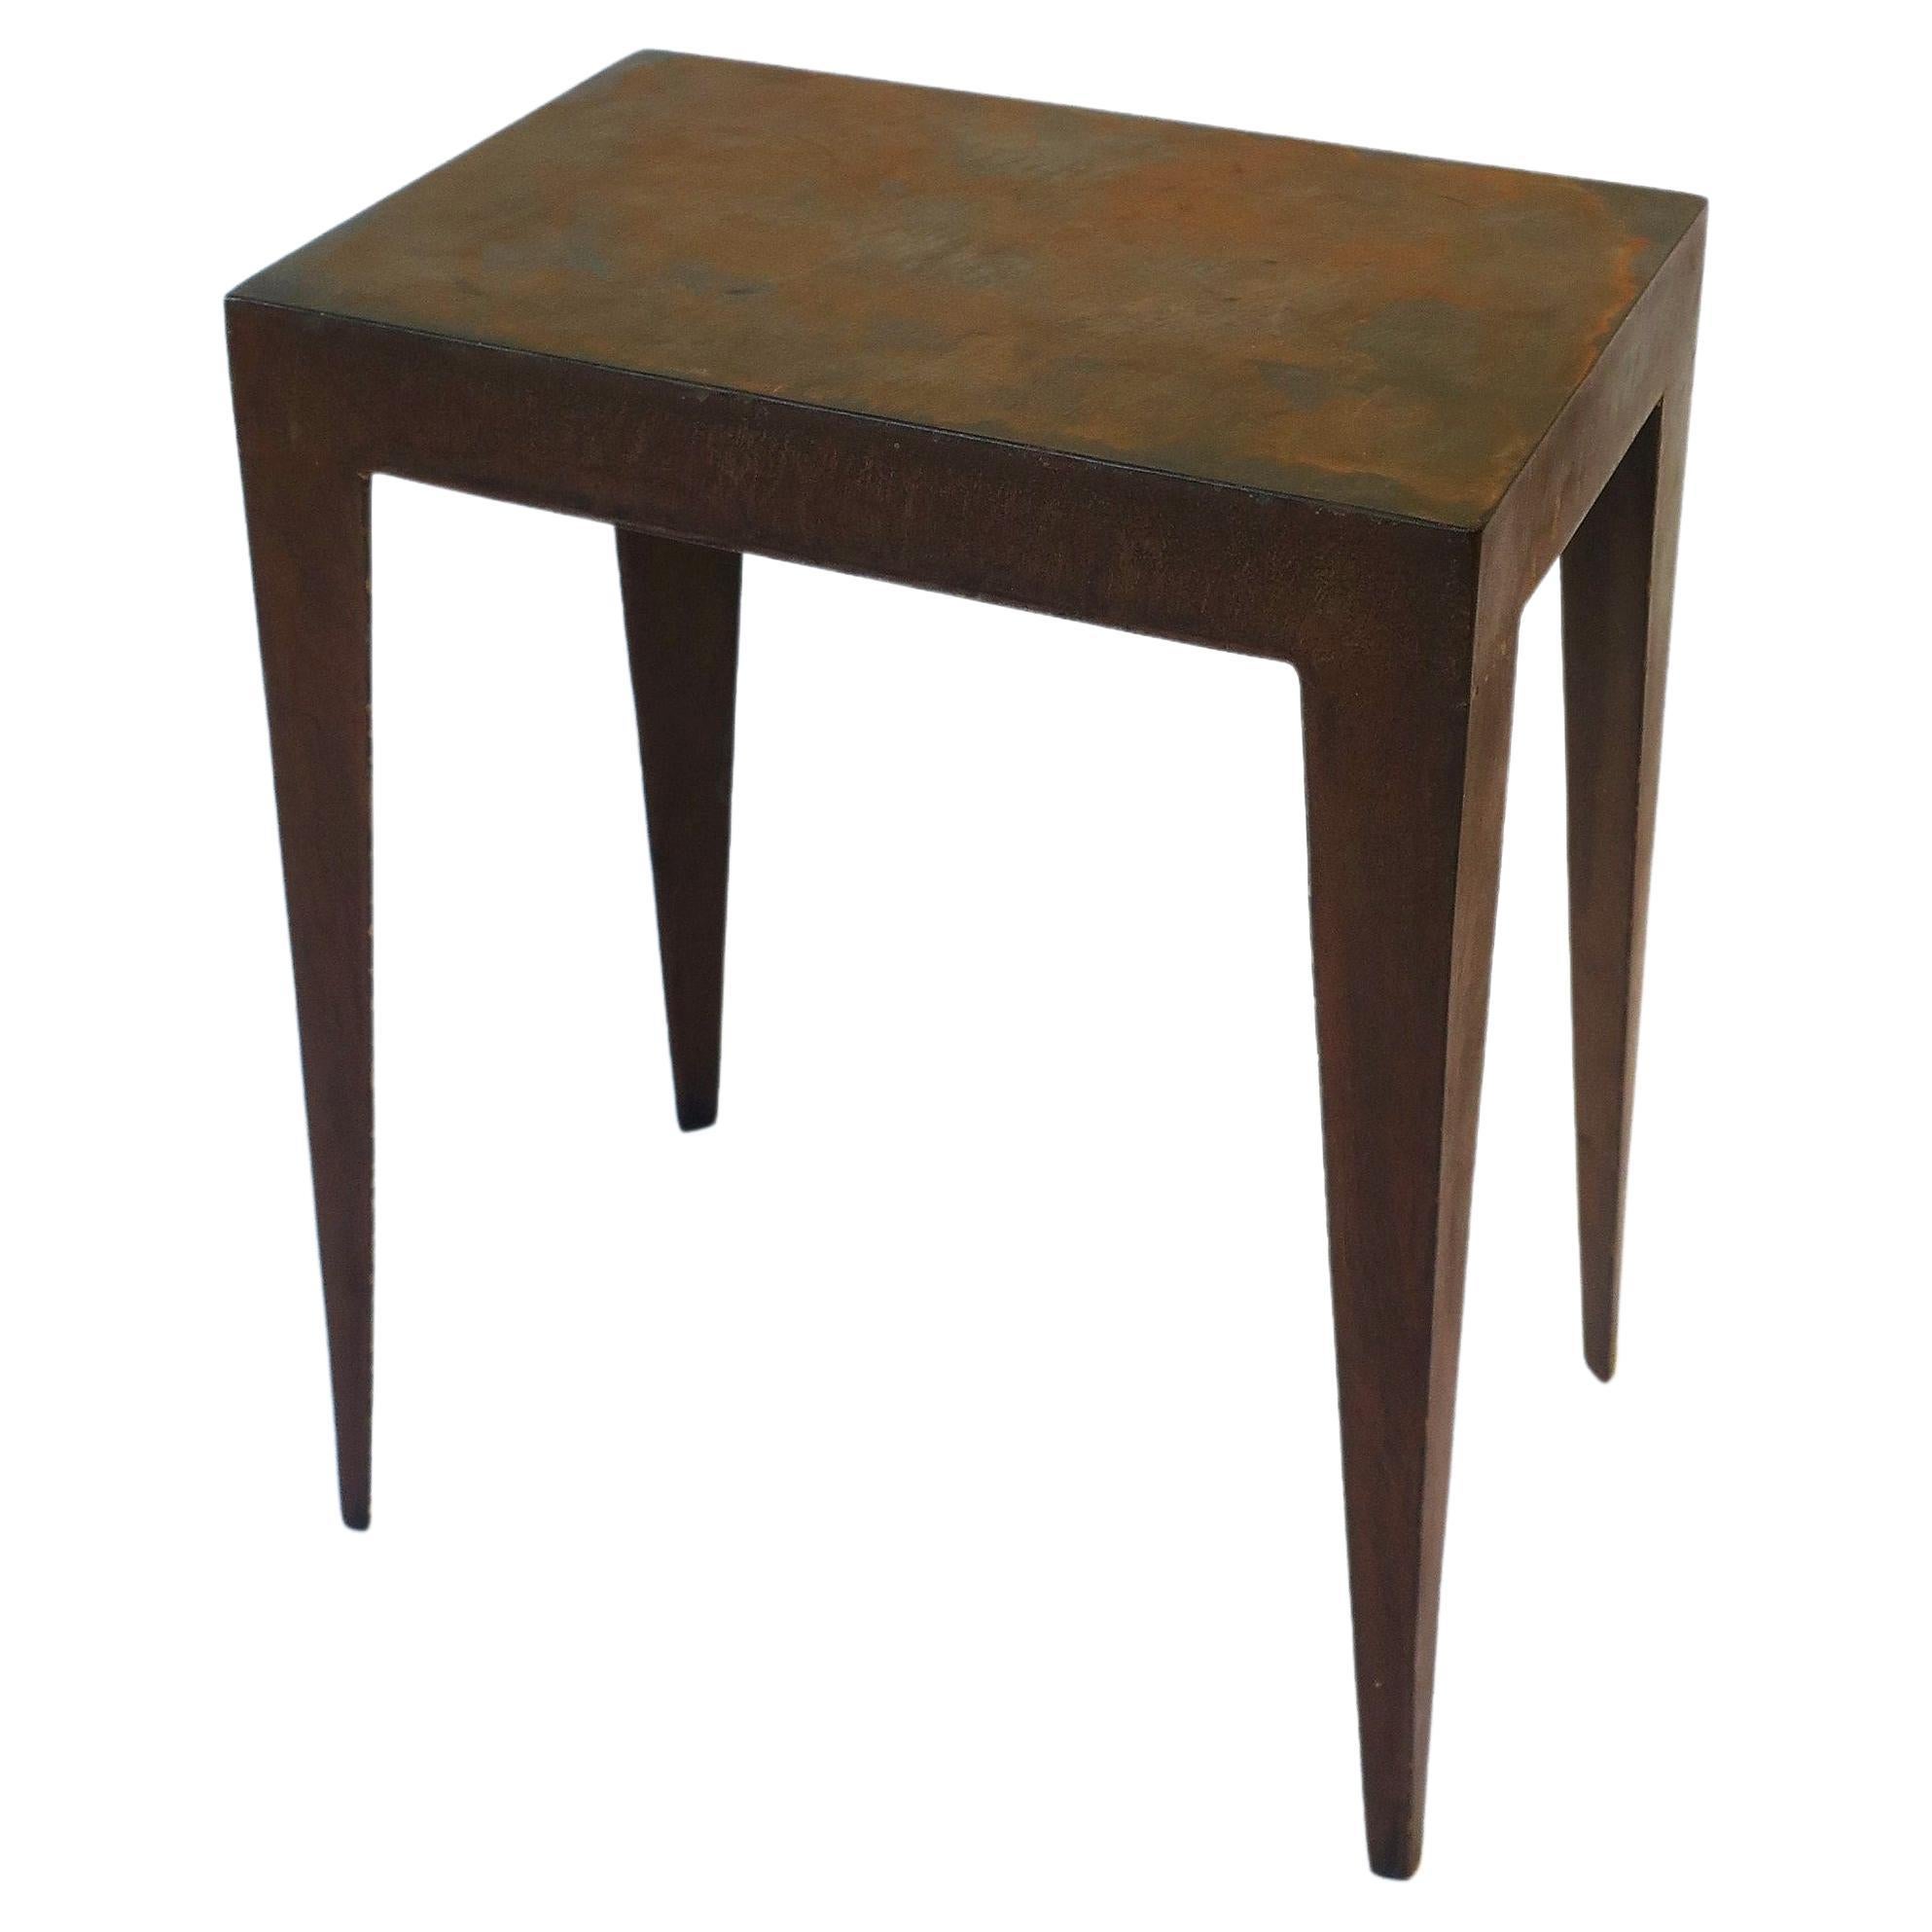 Industrial Minimalist Metal Side or End Table with Deco Influence